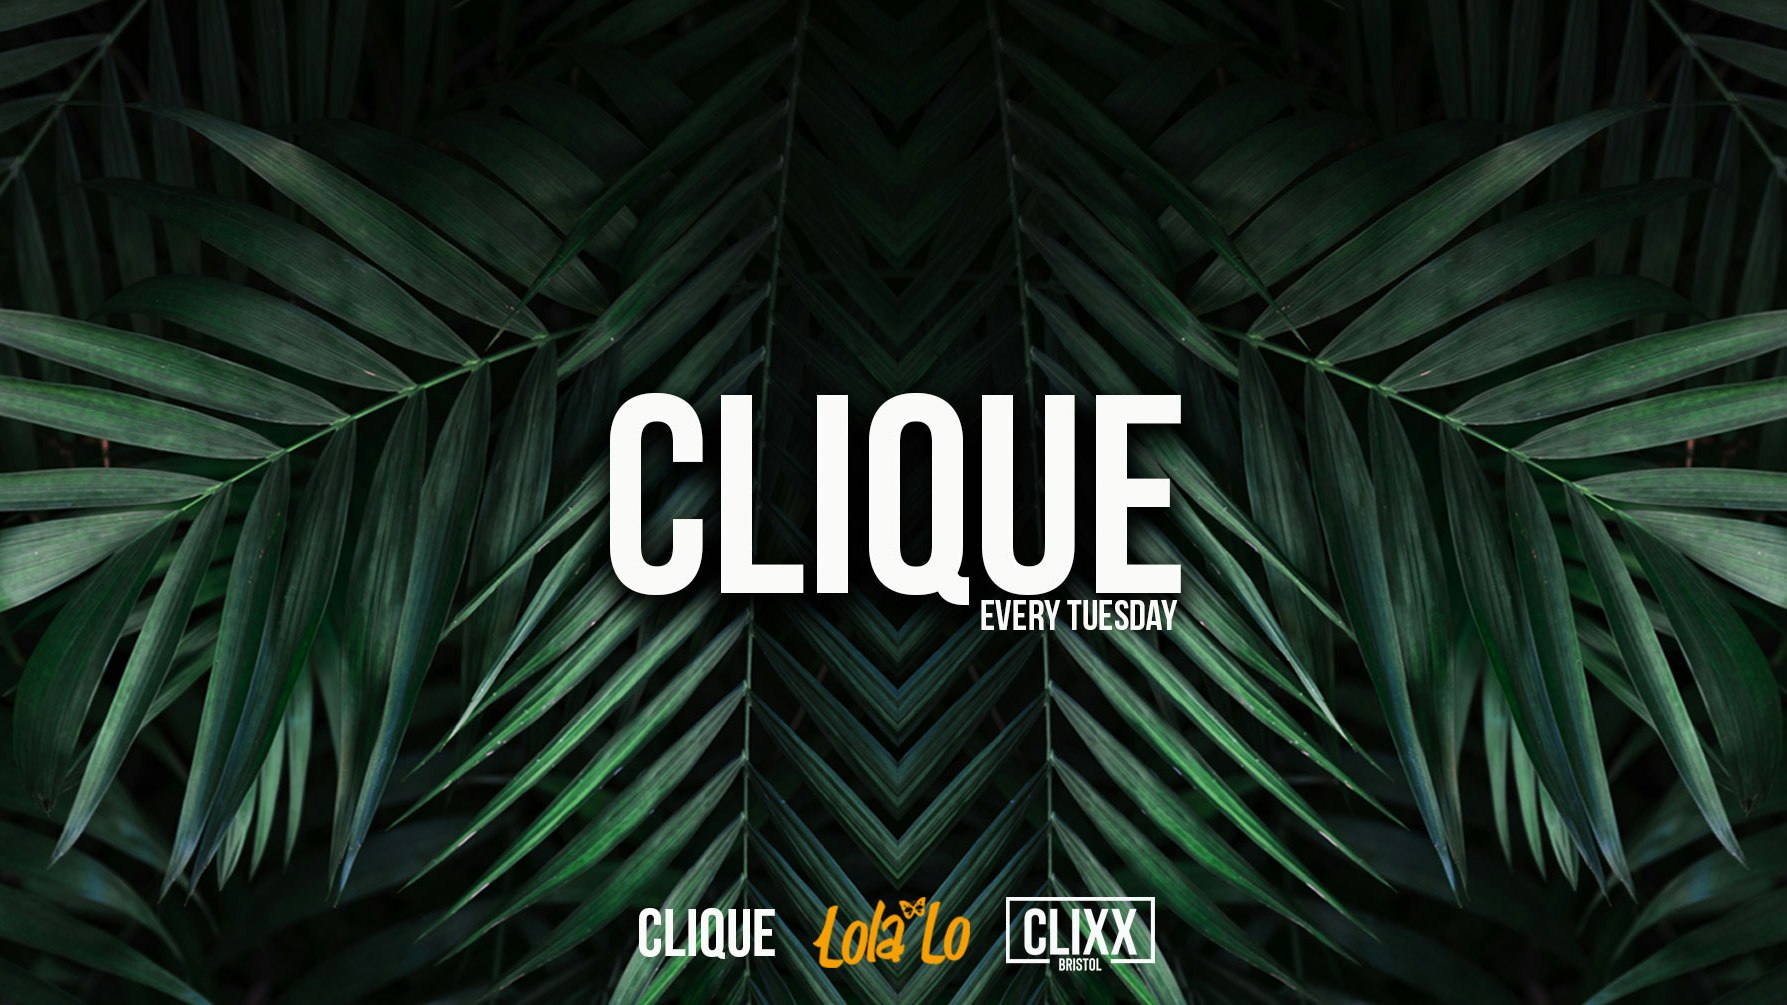 CLIQUE | Every Tuesday // JOIN THE MO F**KING CLIQUE